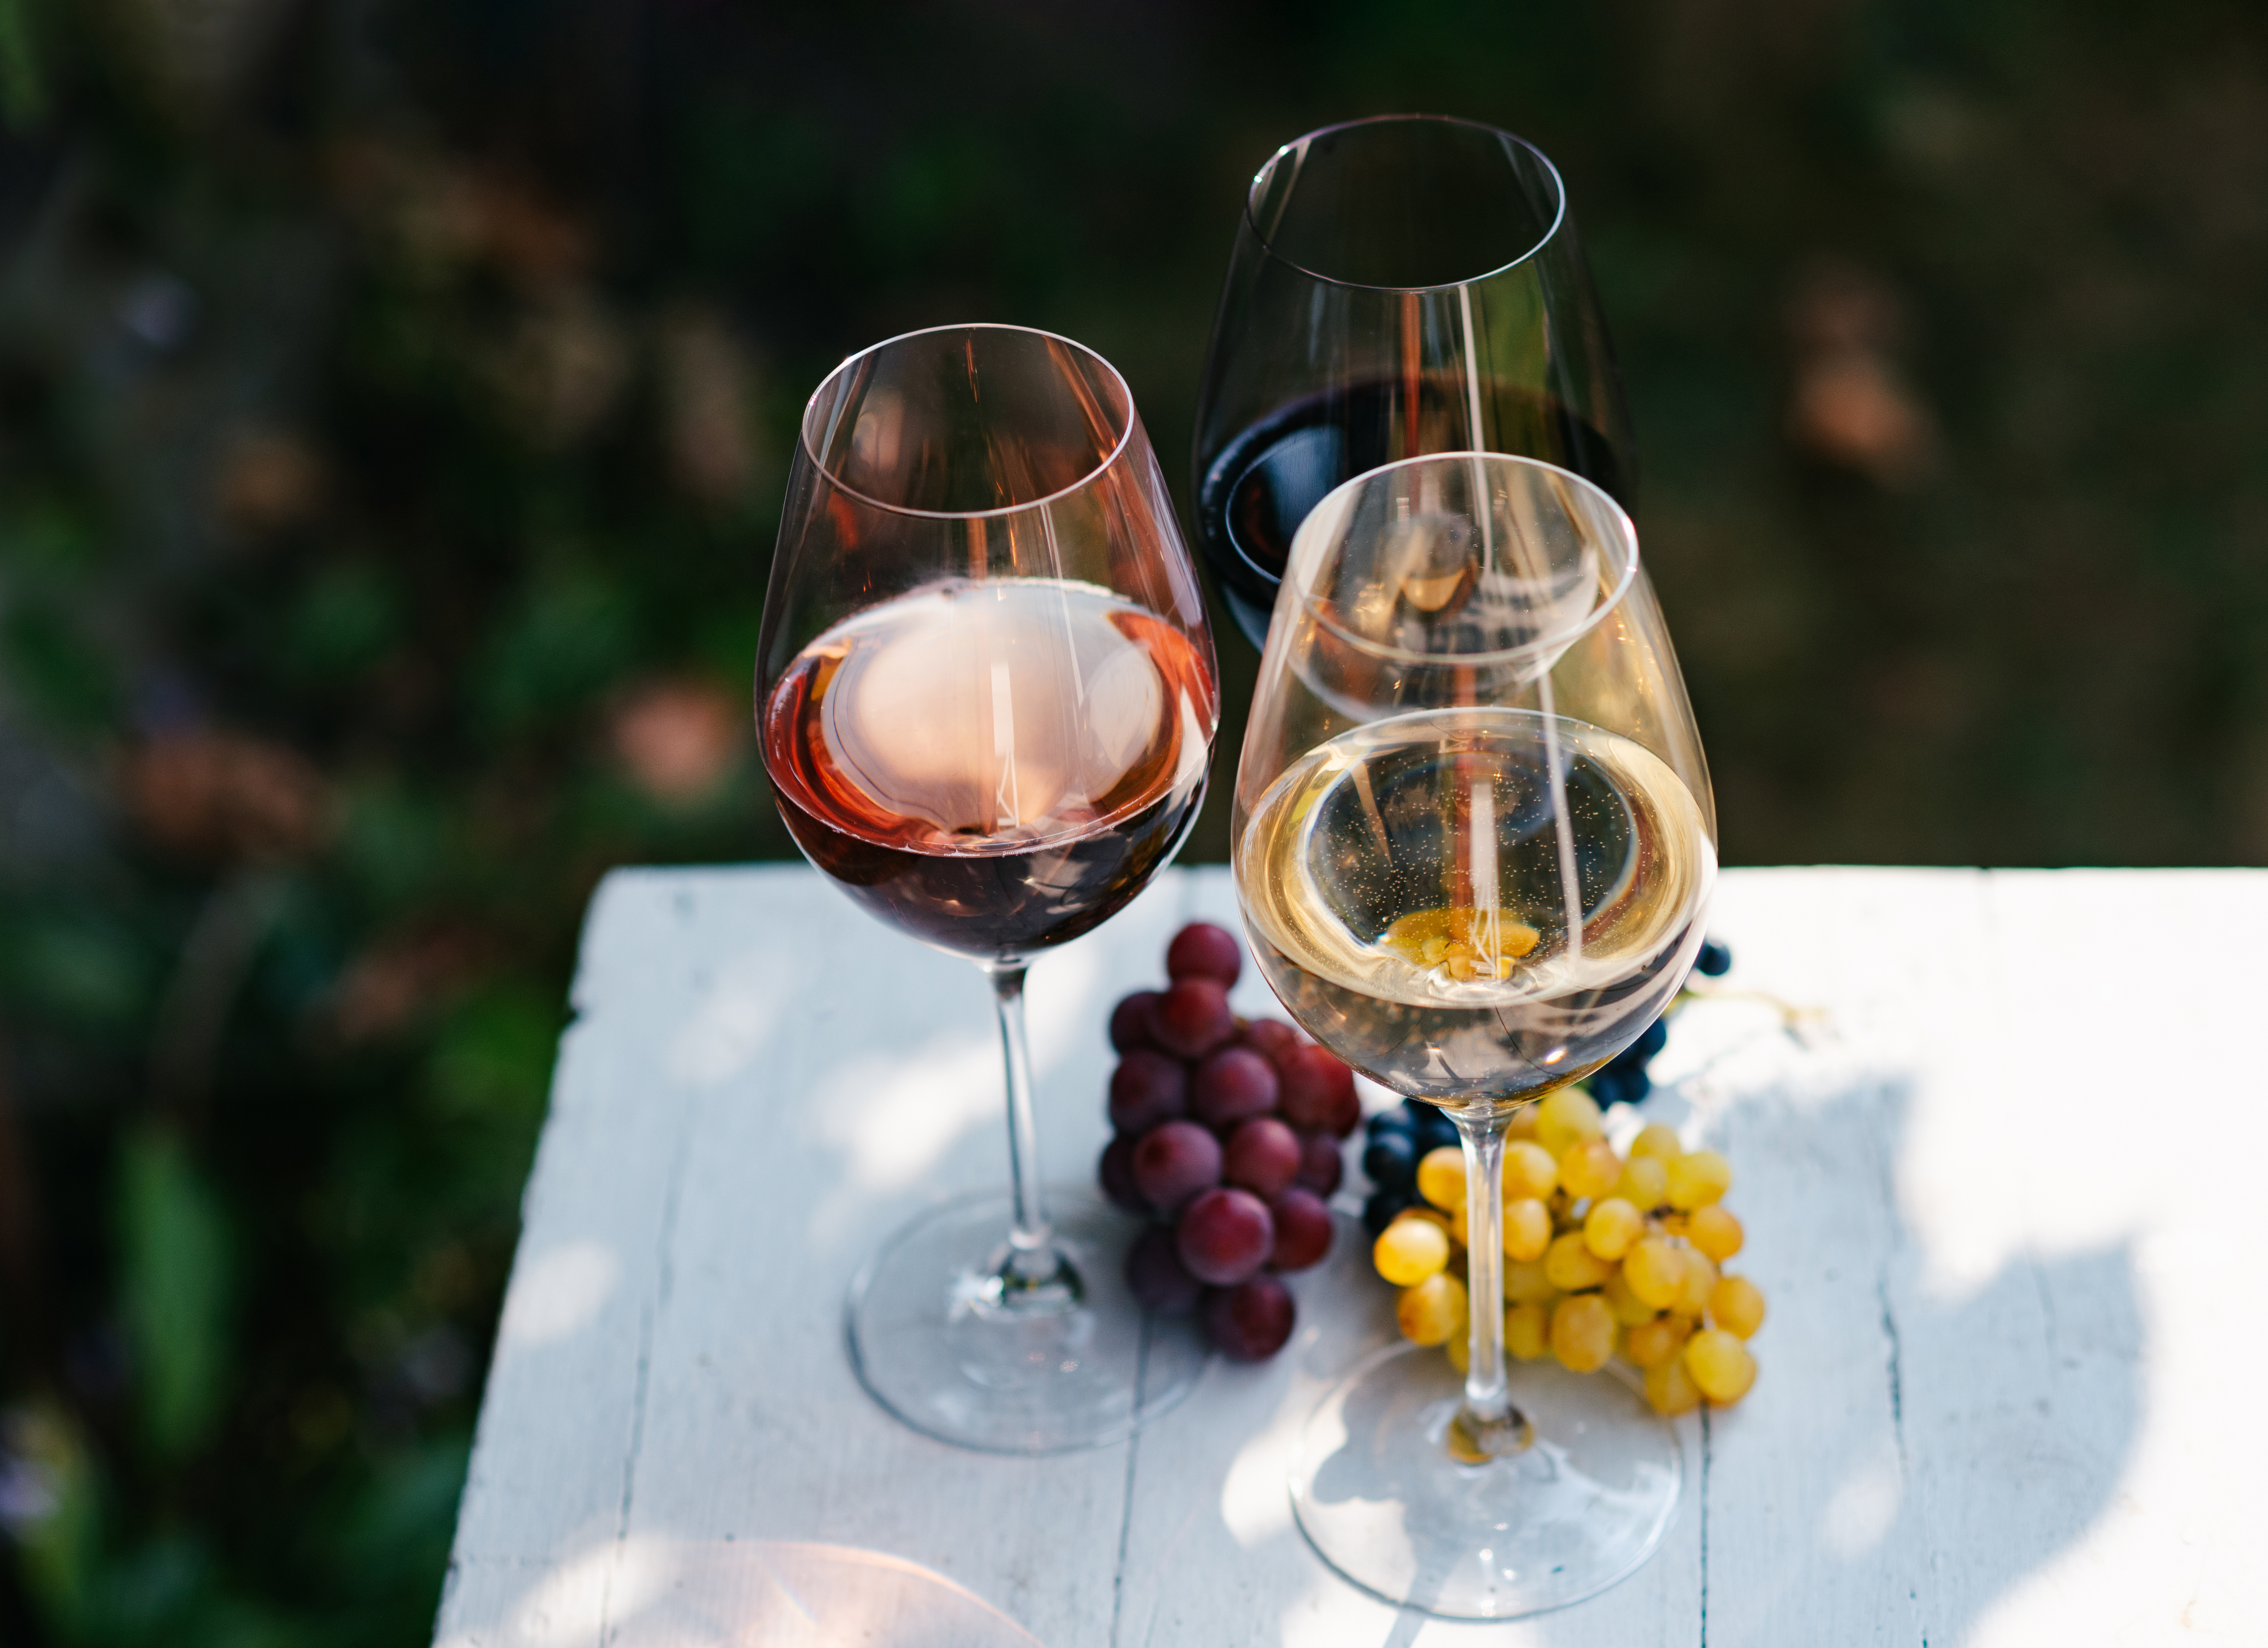 Three wine glasses with red, white, and rosé wine on table beside grapes